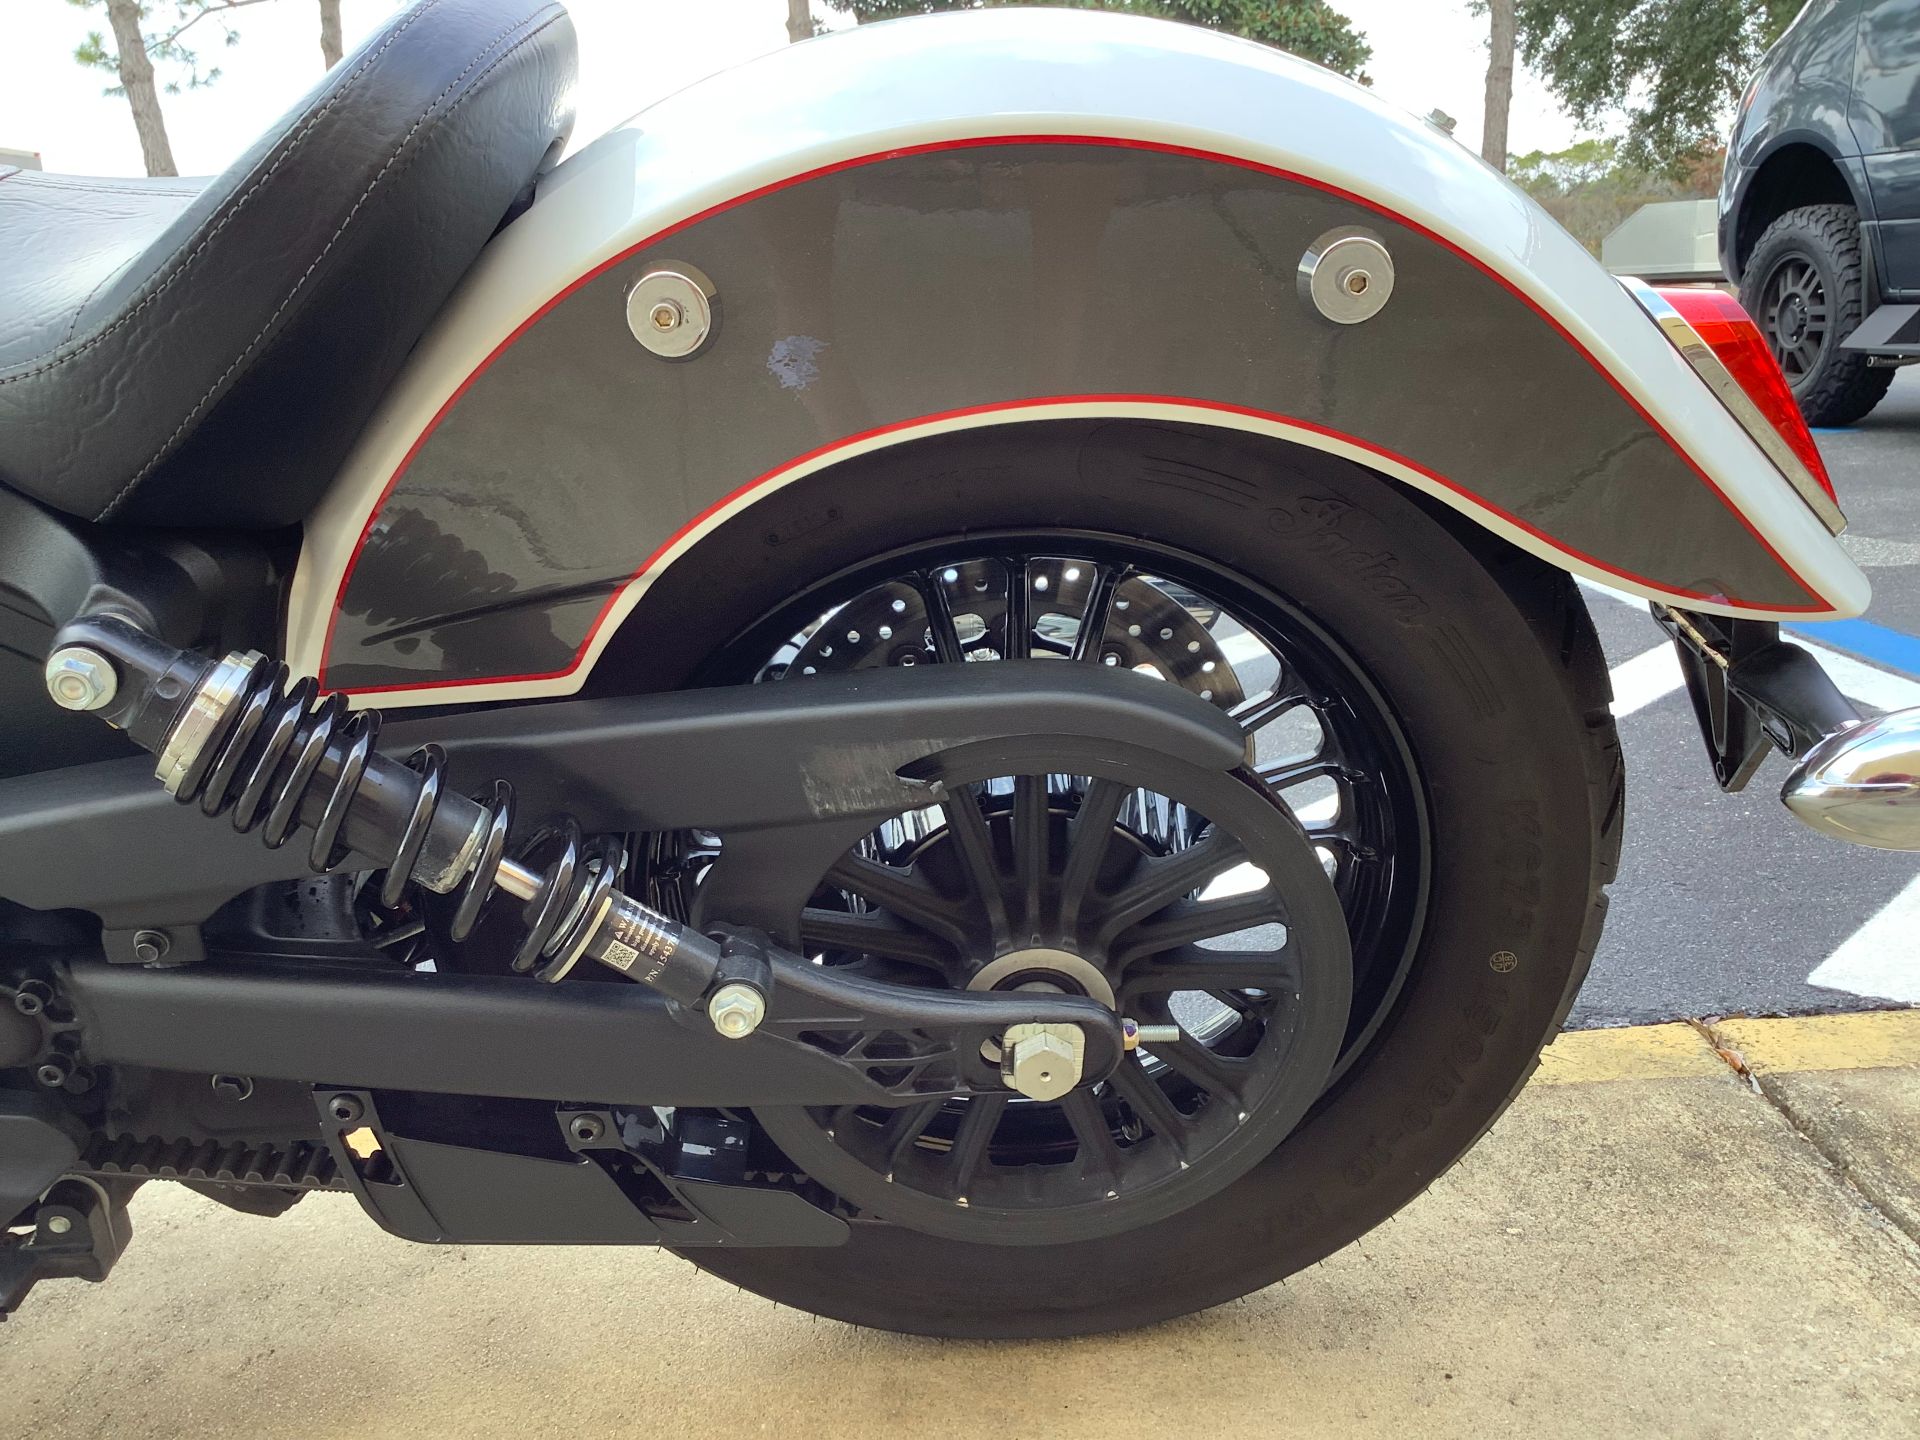 2020 Indian Motorcycle SCOUT SIXTY ABS in Panama City Beach, Florida - Photo 10